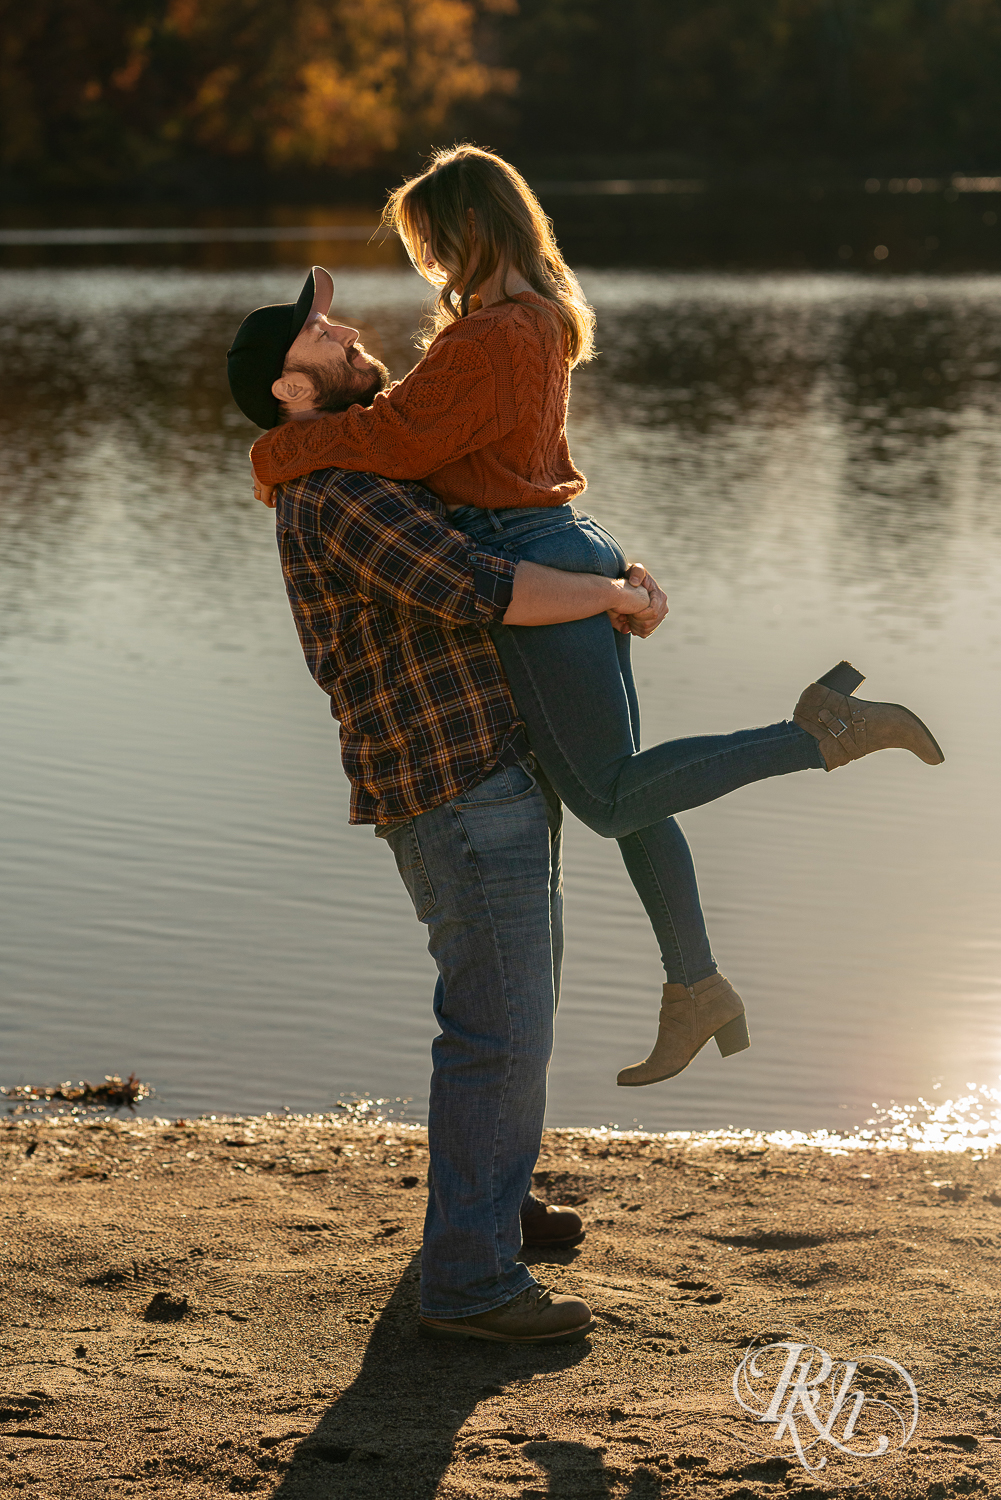 Man in flannel lifting woman in jeans and sweater on beach during sunset in Eagan, Minnesota.